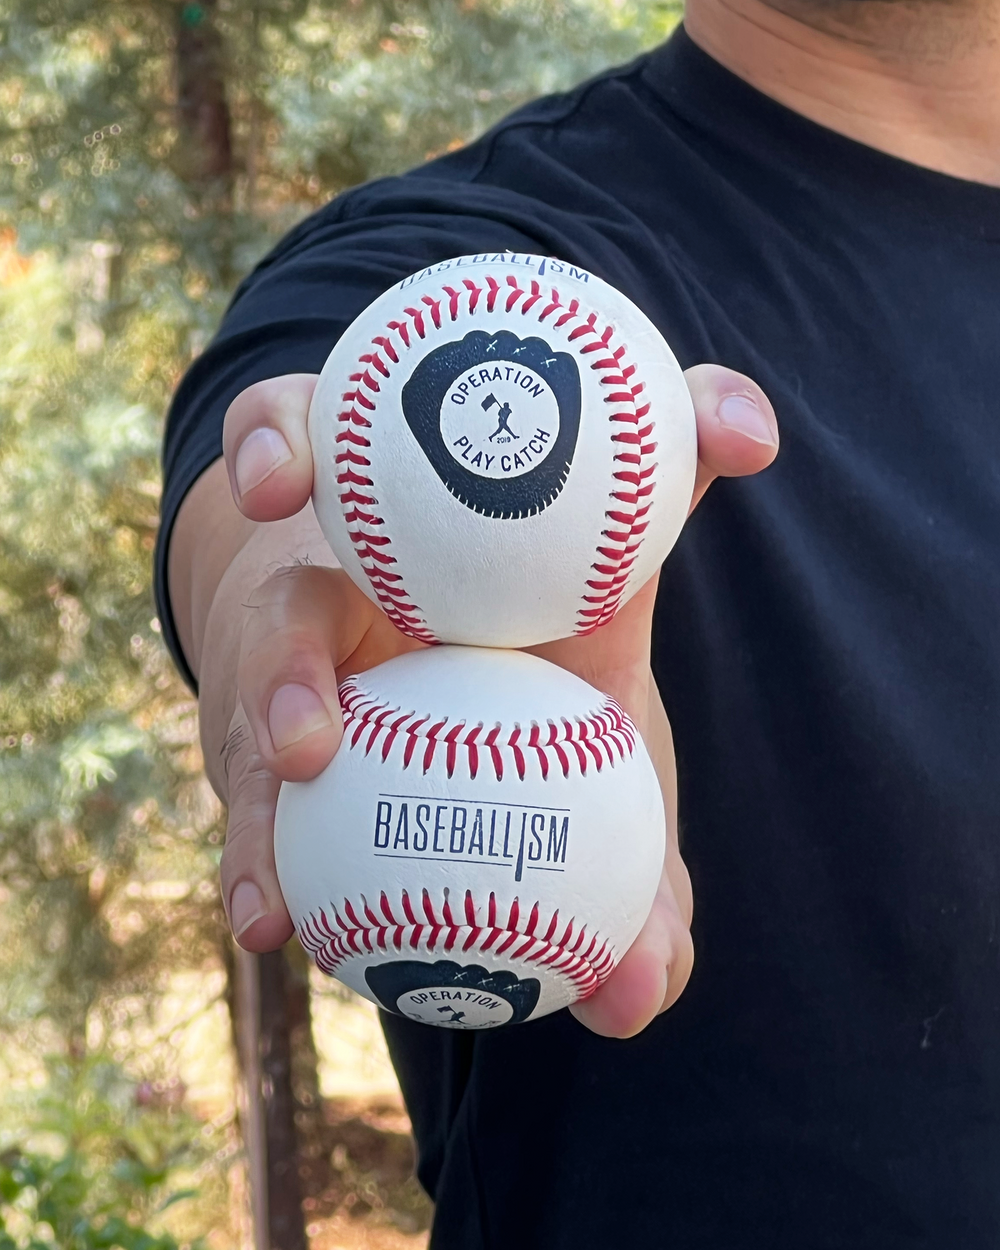 Operation Play Catch 2022 Free Baseballs with Any Purchase